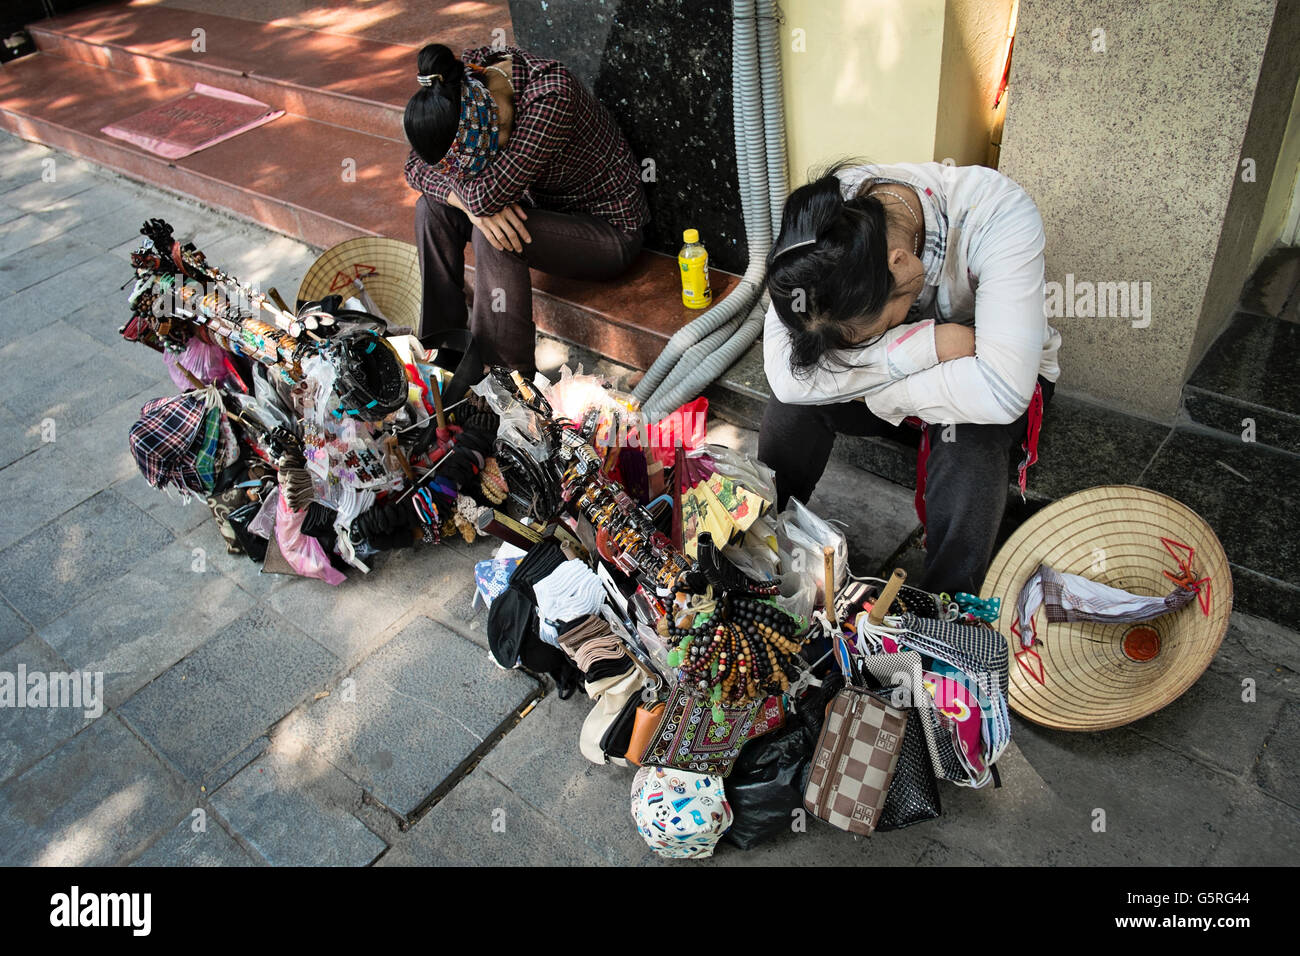 Two young women who sell tourist gifts, rest on the steps of a building in the Old District of Hanoi, Hoan Kiem, Vietnam. Stock Photo